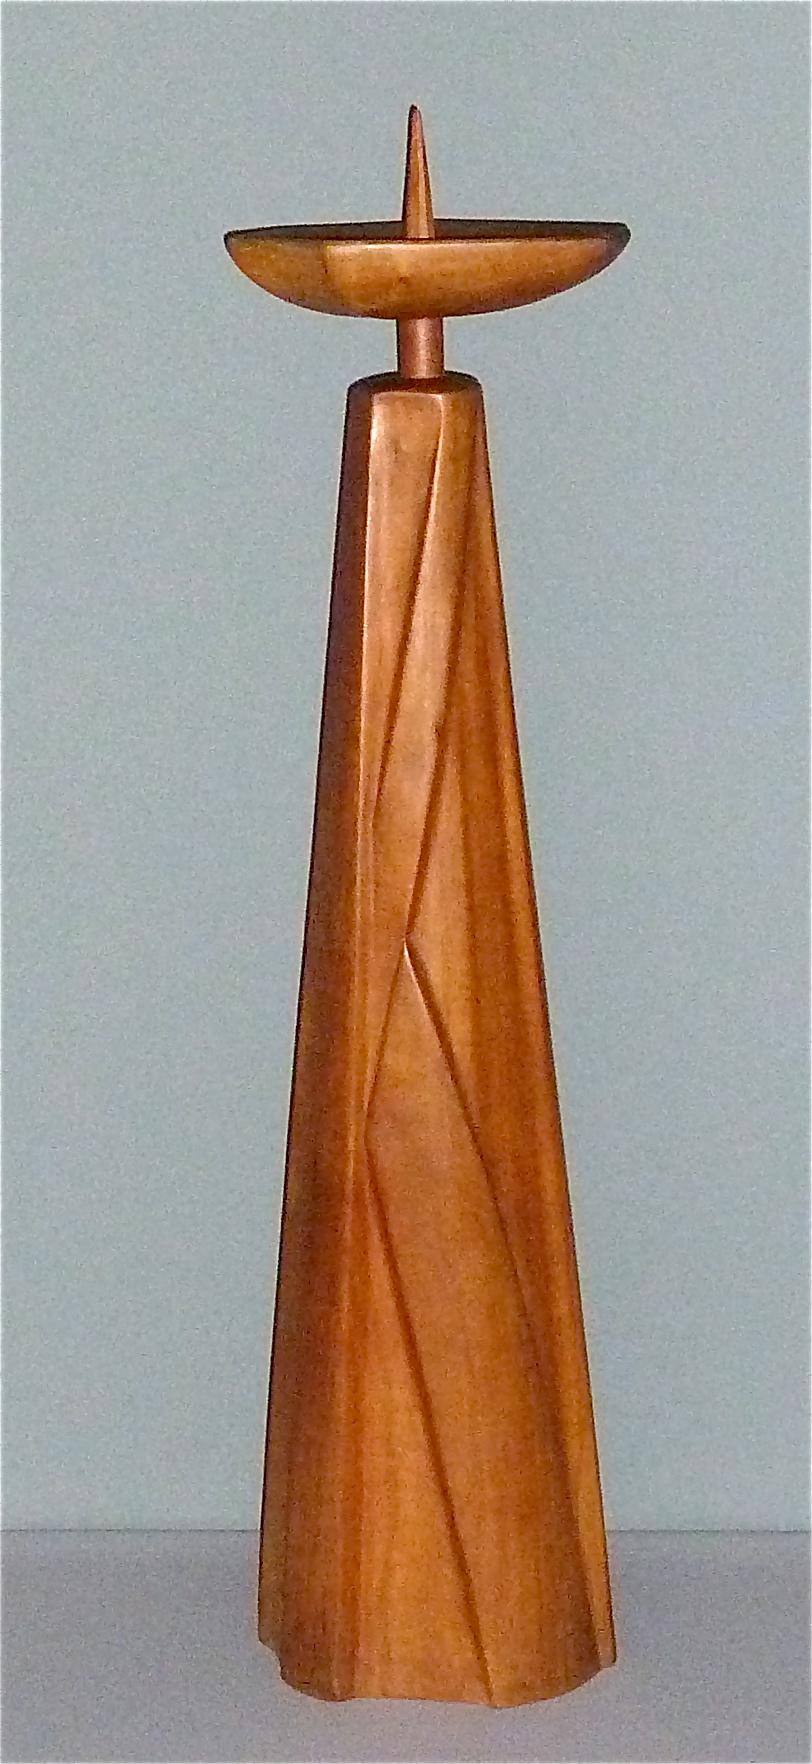 Sculptural large carved solid nut wood candleholder manufactured in Germany circa 1930-1950, circle of Rudolf Steiner Werkstätten / workshop Dornach attribution. Signed to the bottom with an unidentified artist mark, the anthroposophic criterias of